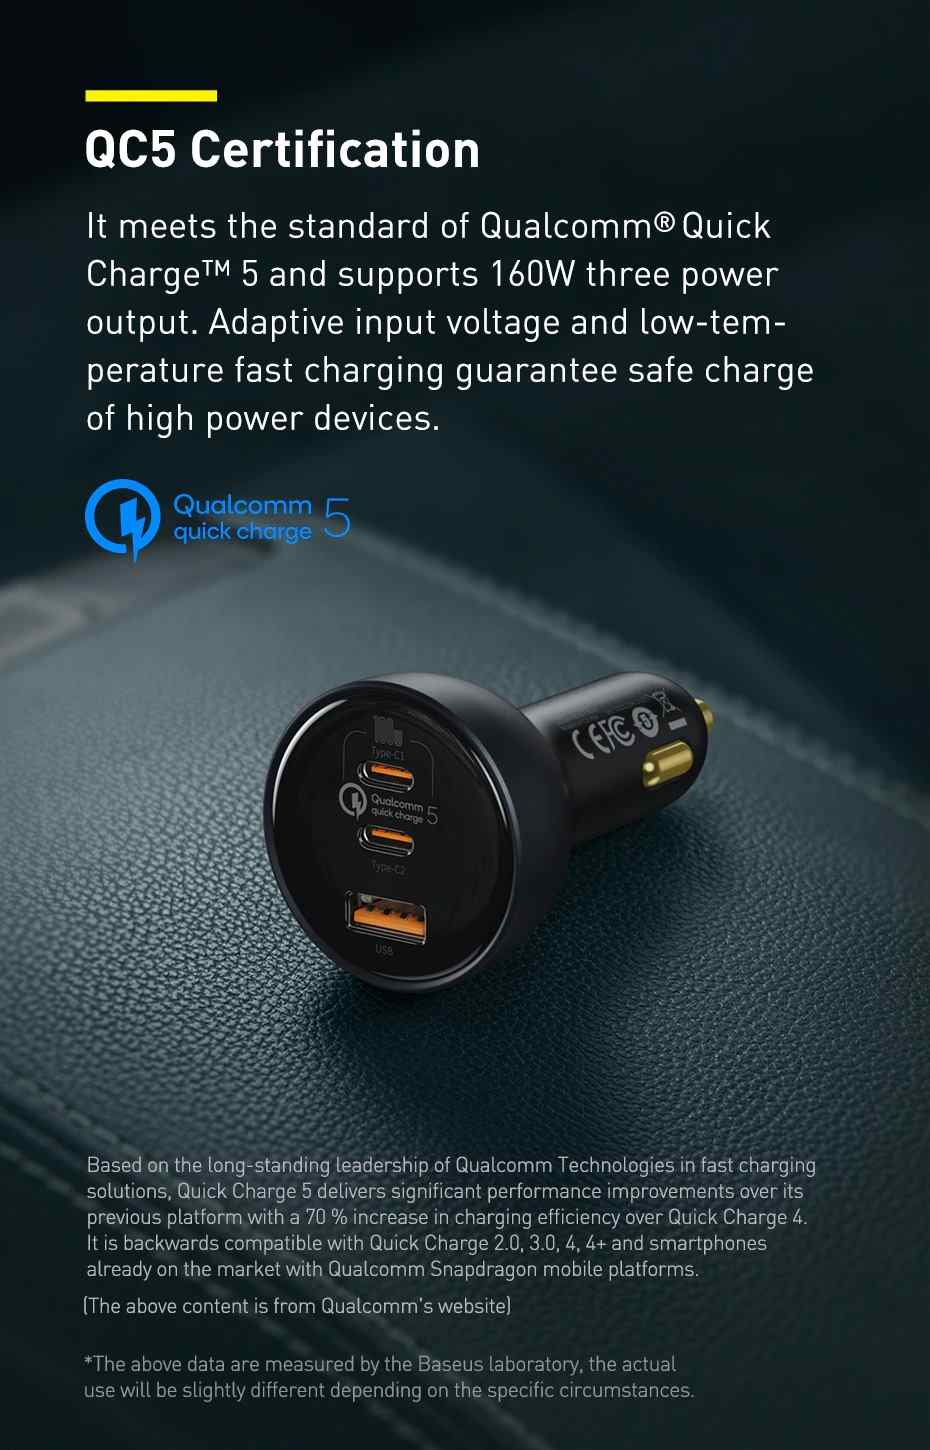 baseus 160w qualcomm certified qc 5.0 dual type-c and usb-a fast charging car charger with 1m 100w type-c to type-c cable